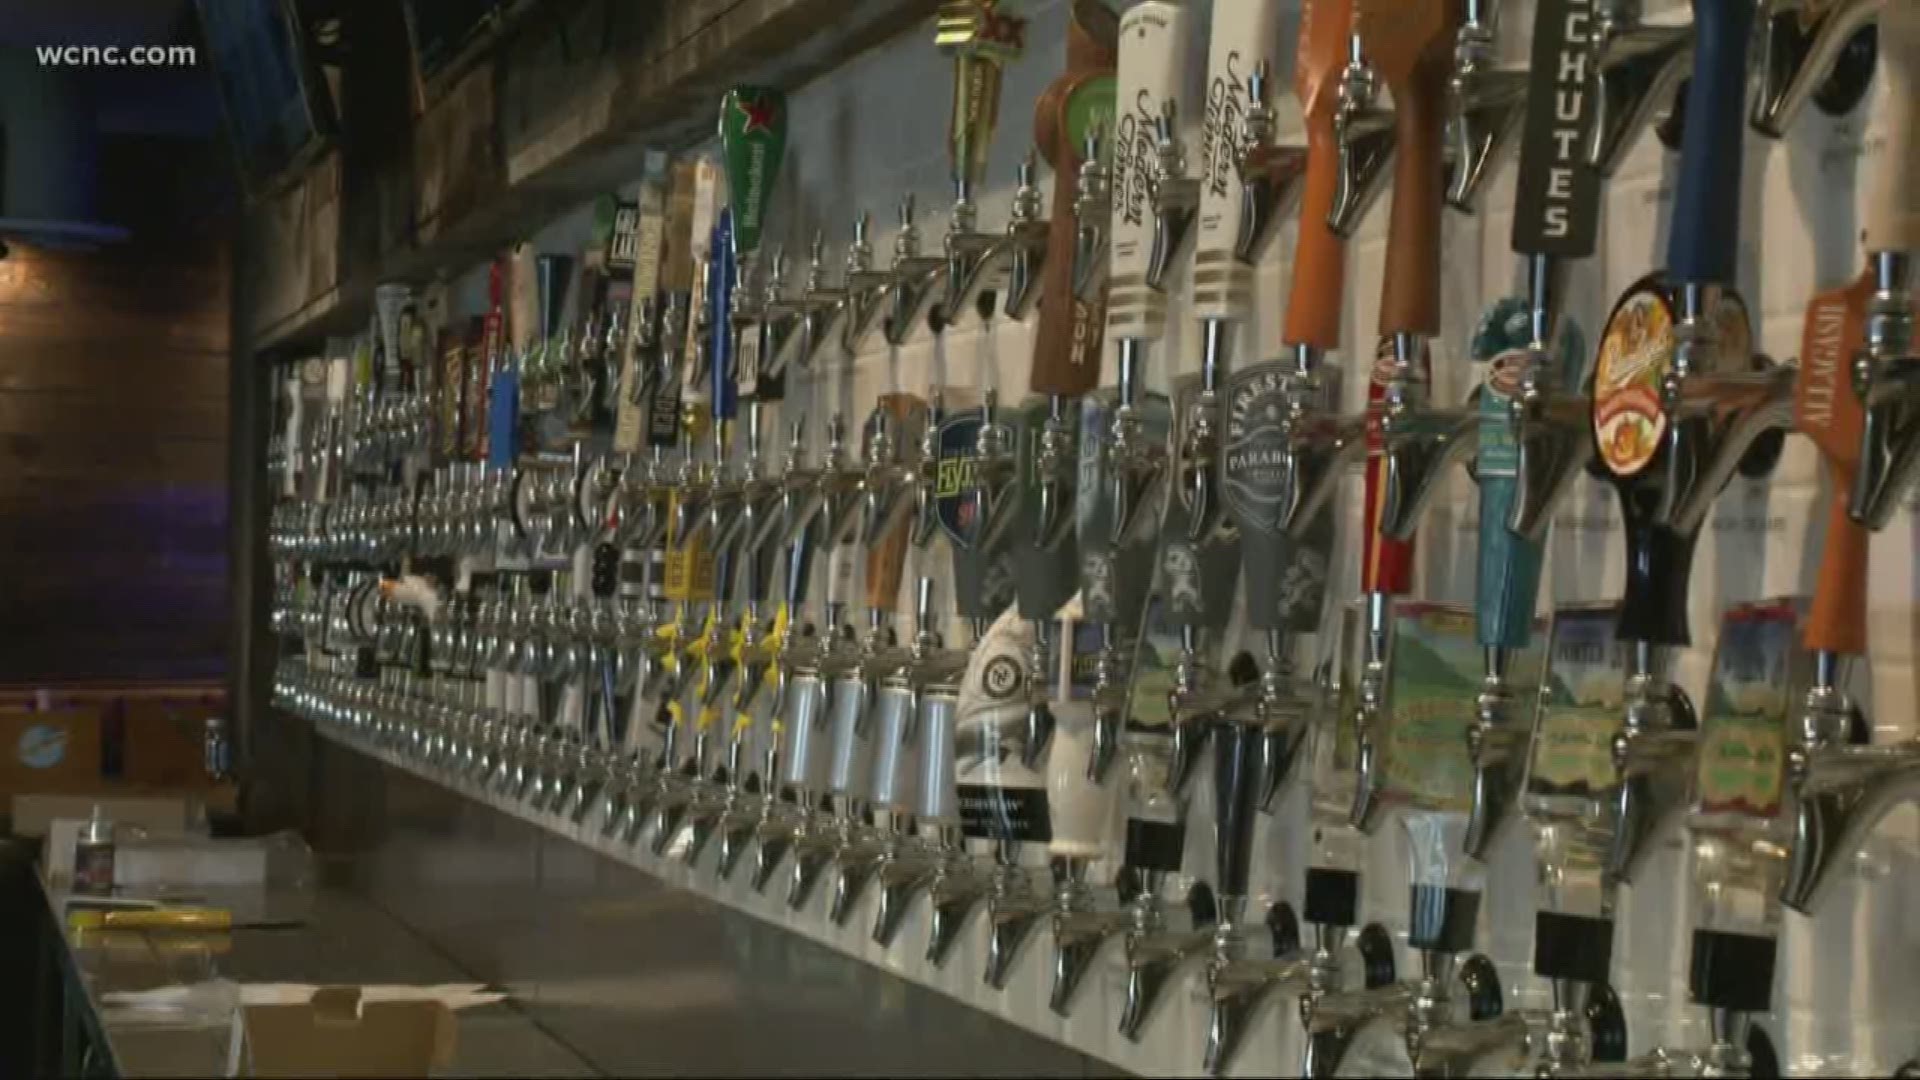 A record 436 taps are at the newly opened Charlotte Beer Garden.